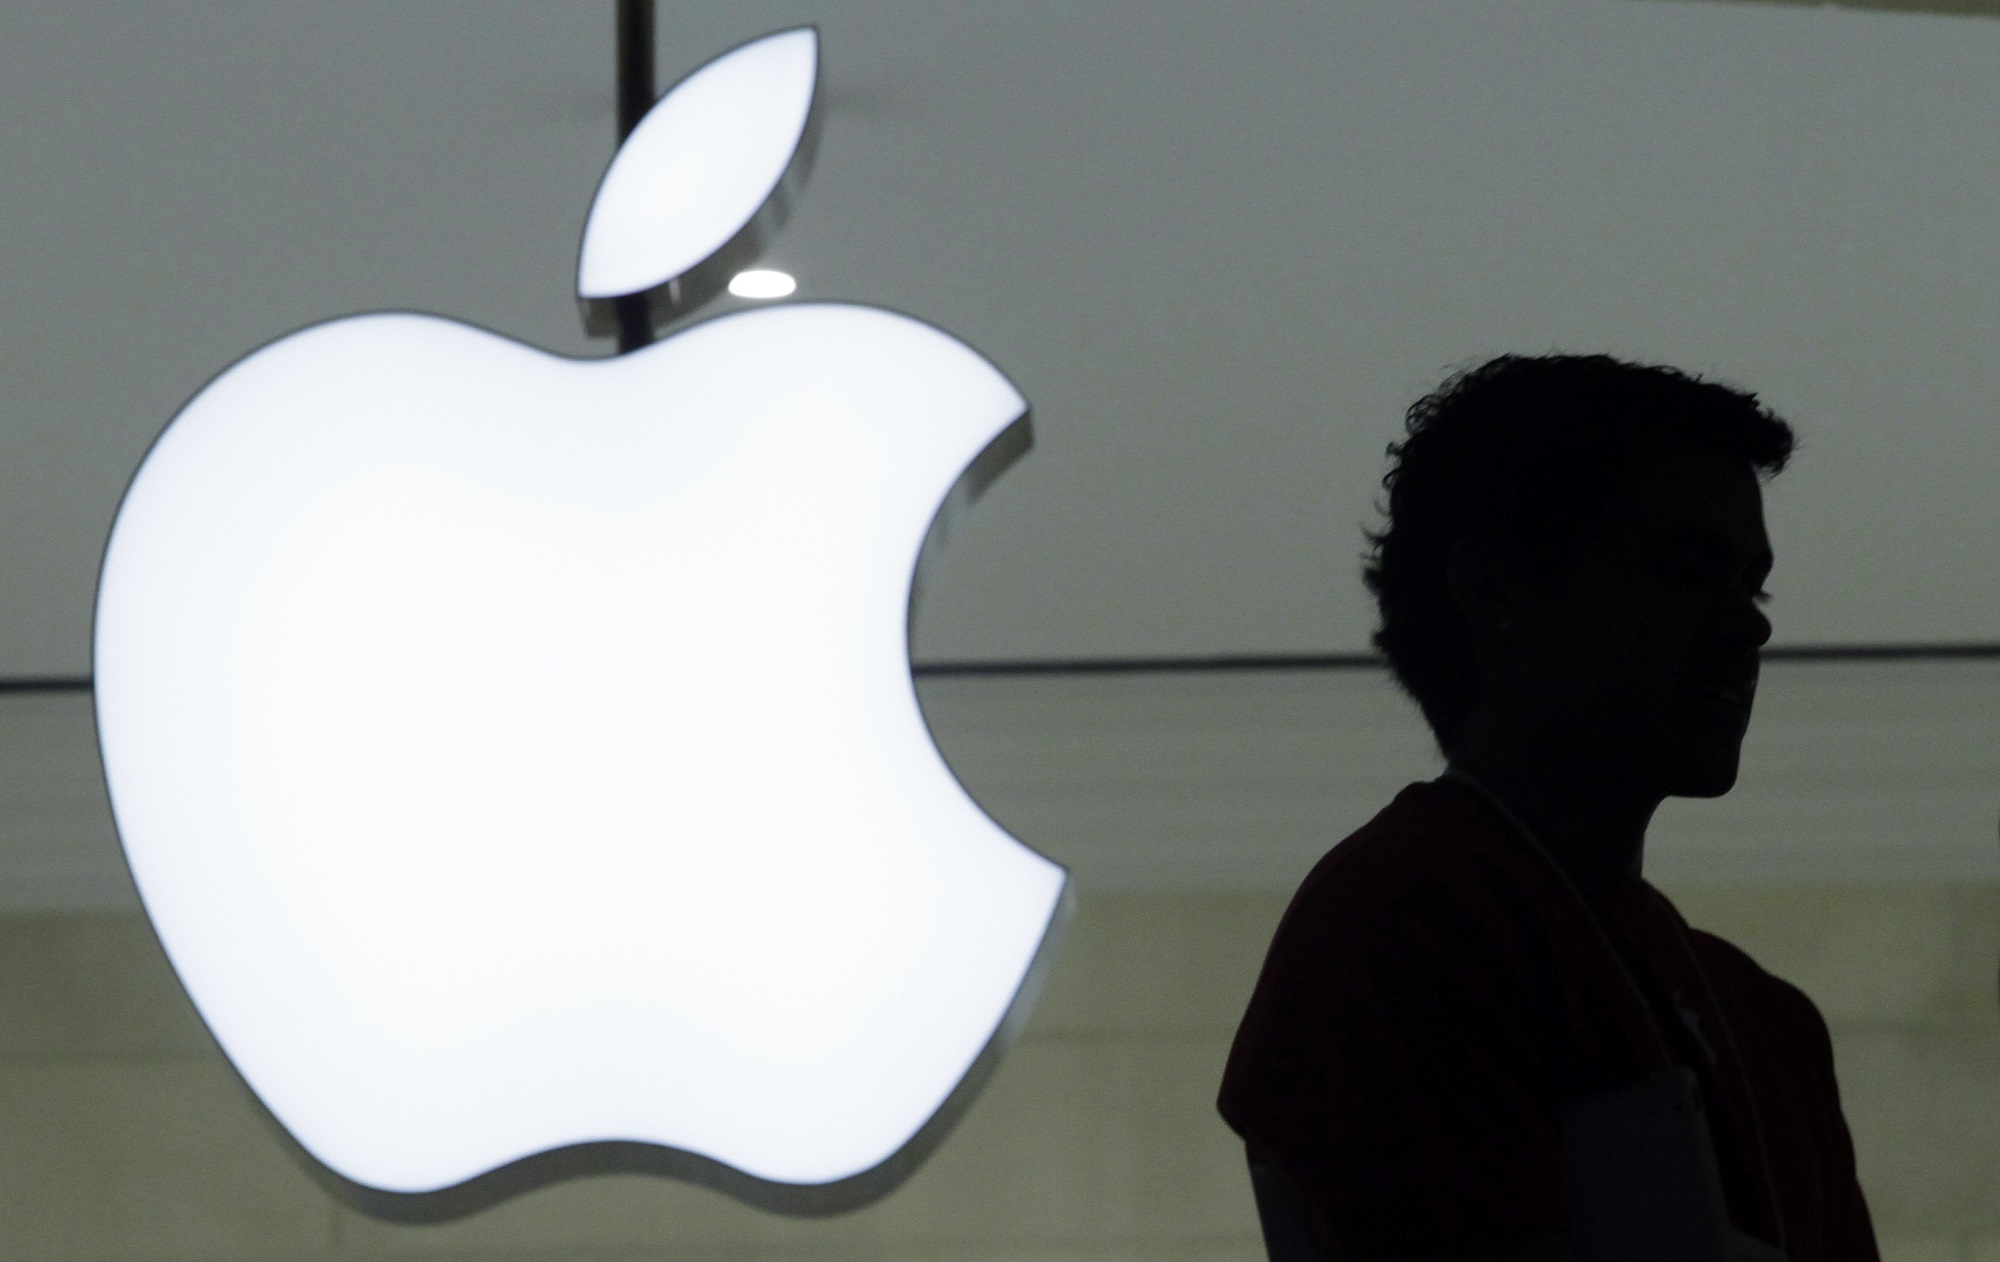 EU orders Apple to pay up to 13B euros in back taxes